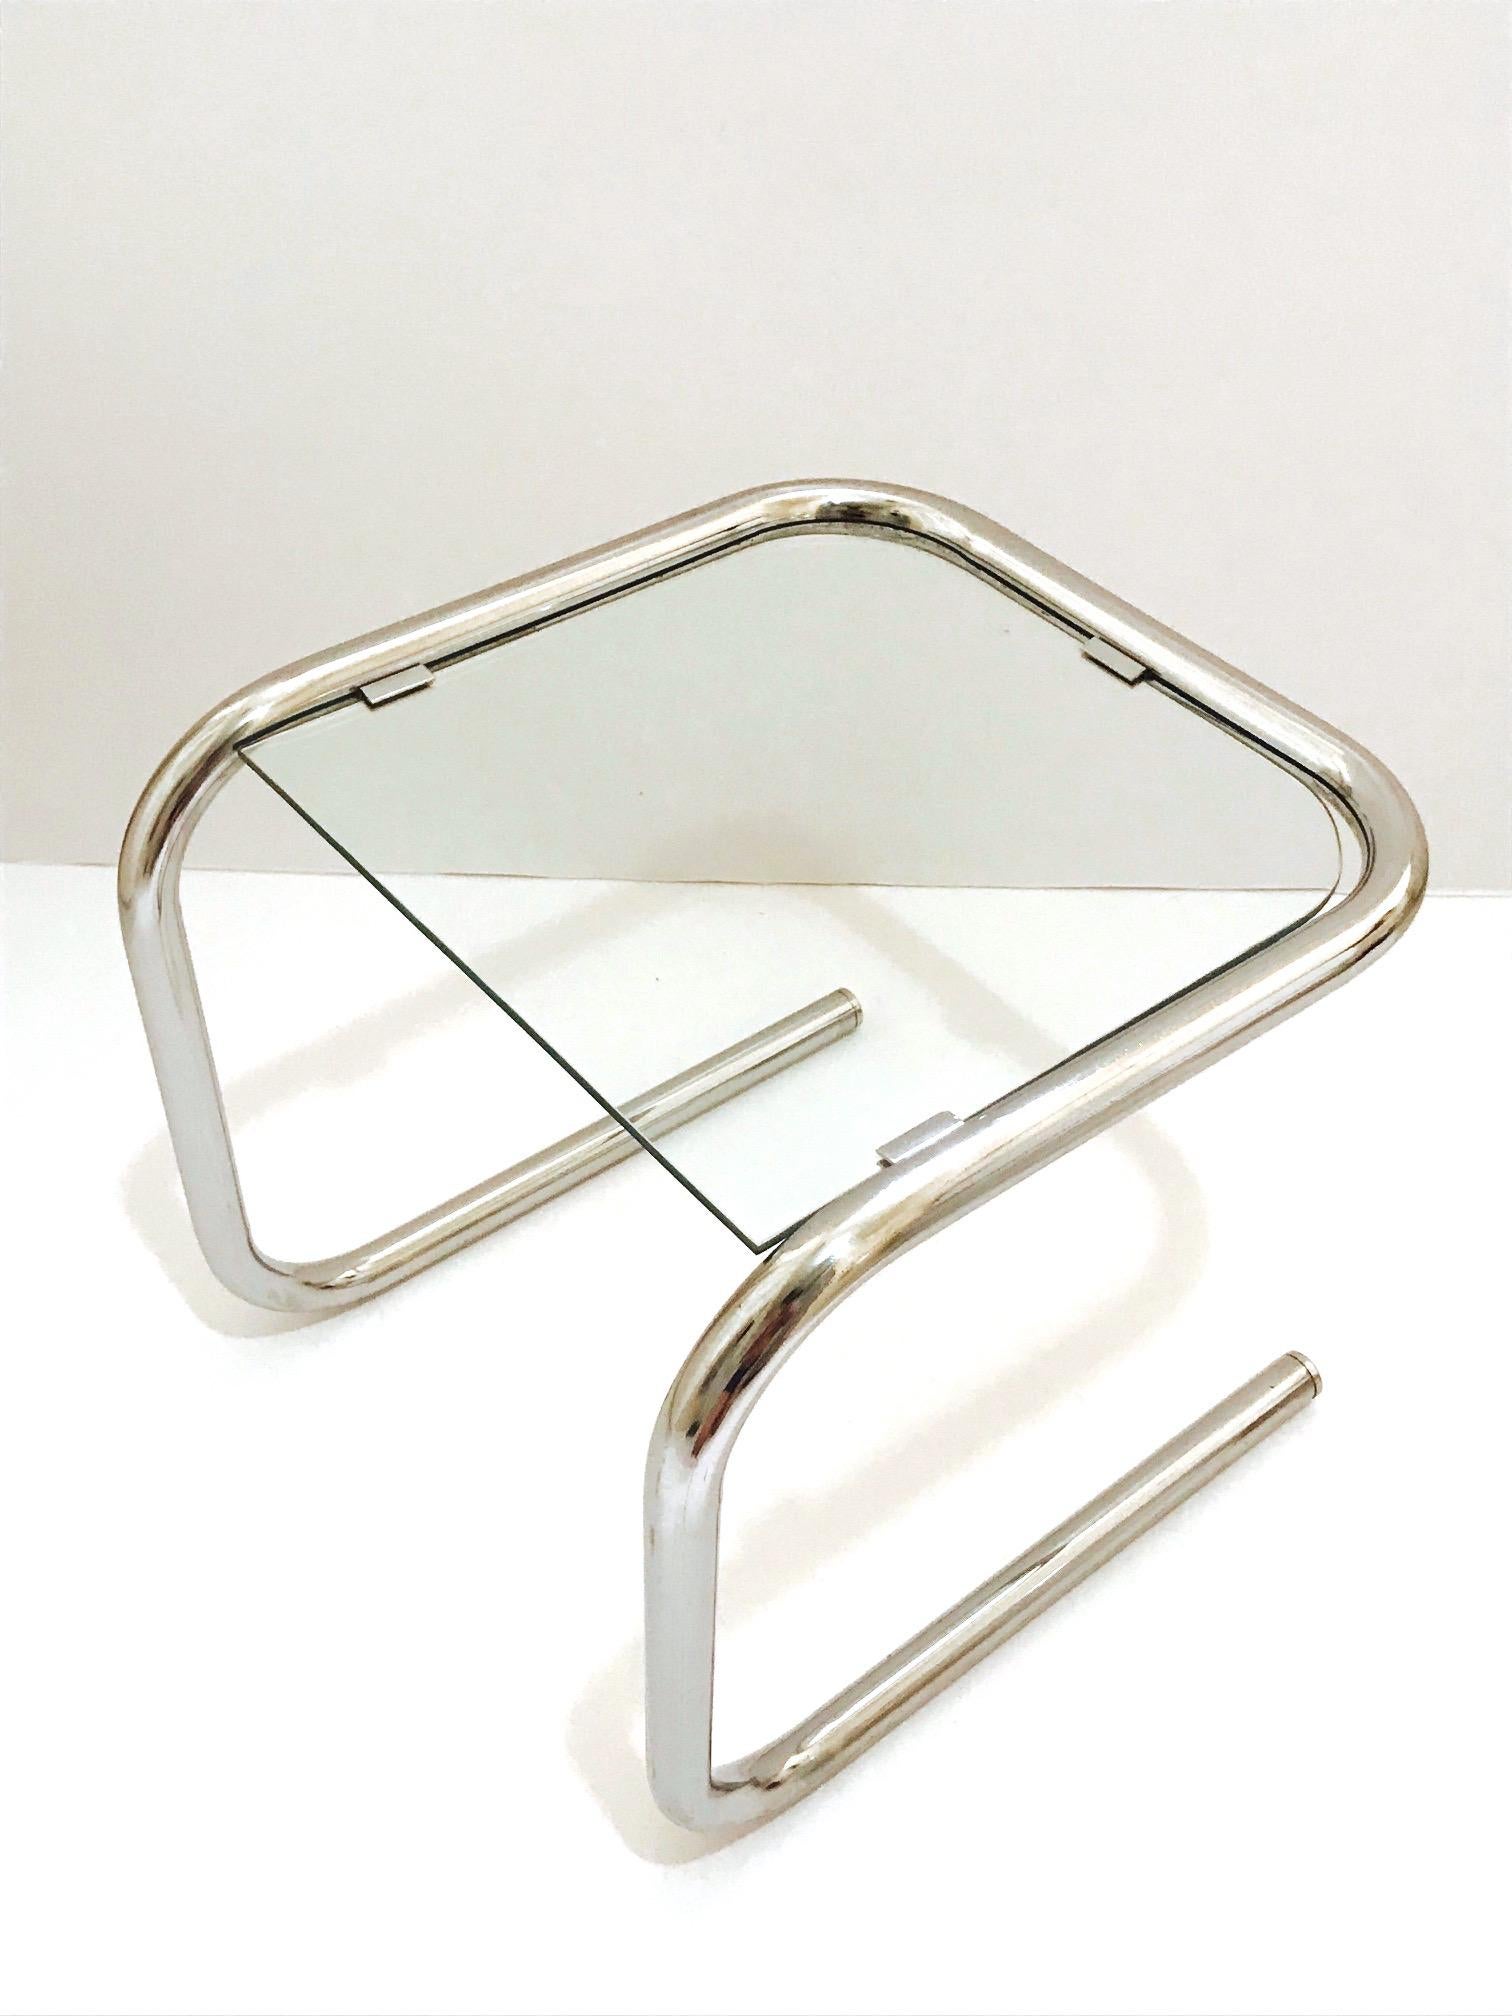 German Mid-Century Modern Tubular Chrome Side Table in the Style of Thonet, 1960s